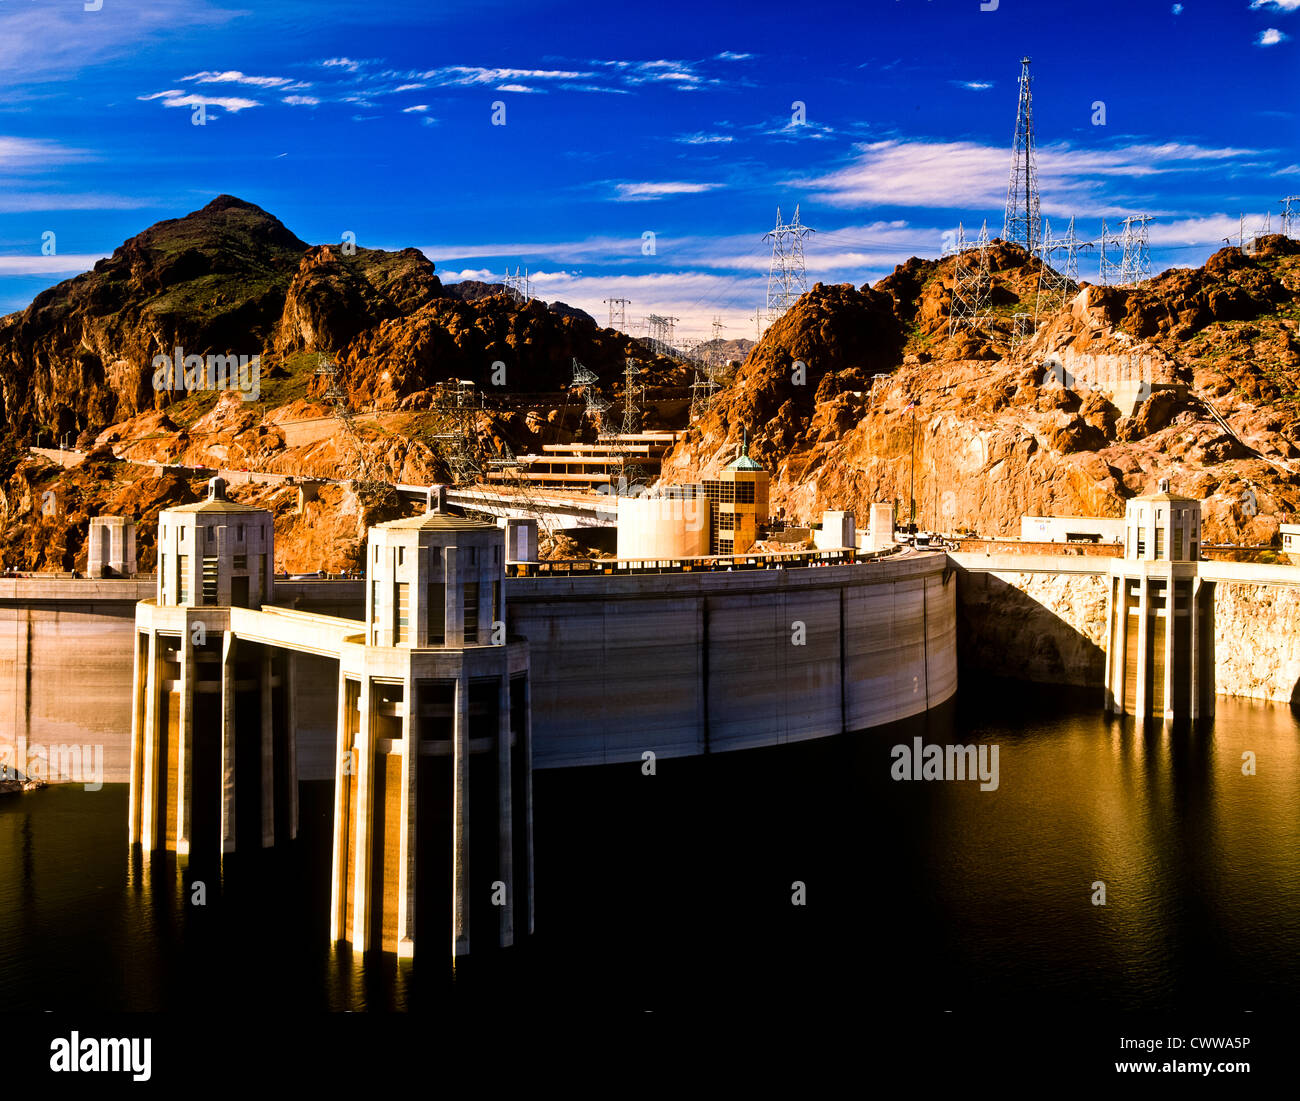 Hoover Dam straddles the mighty Colorado River, which forms the border between the states of Nevada and Arizona. Stock Photo